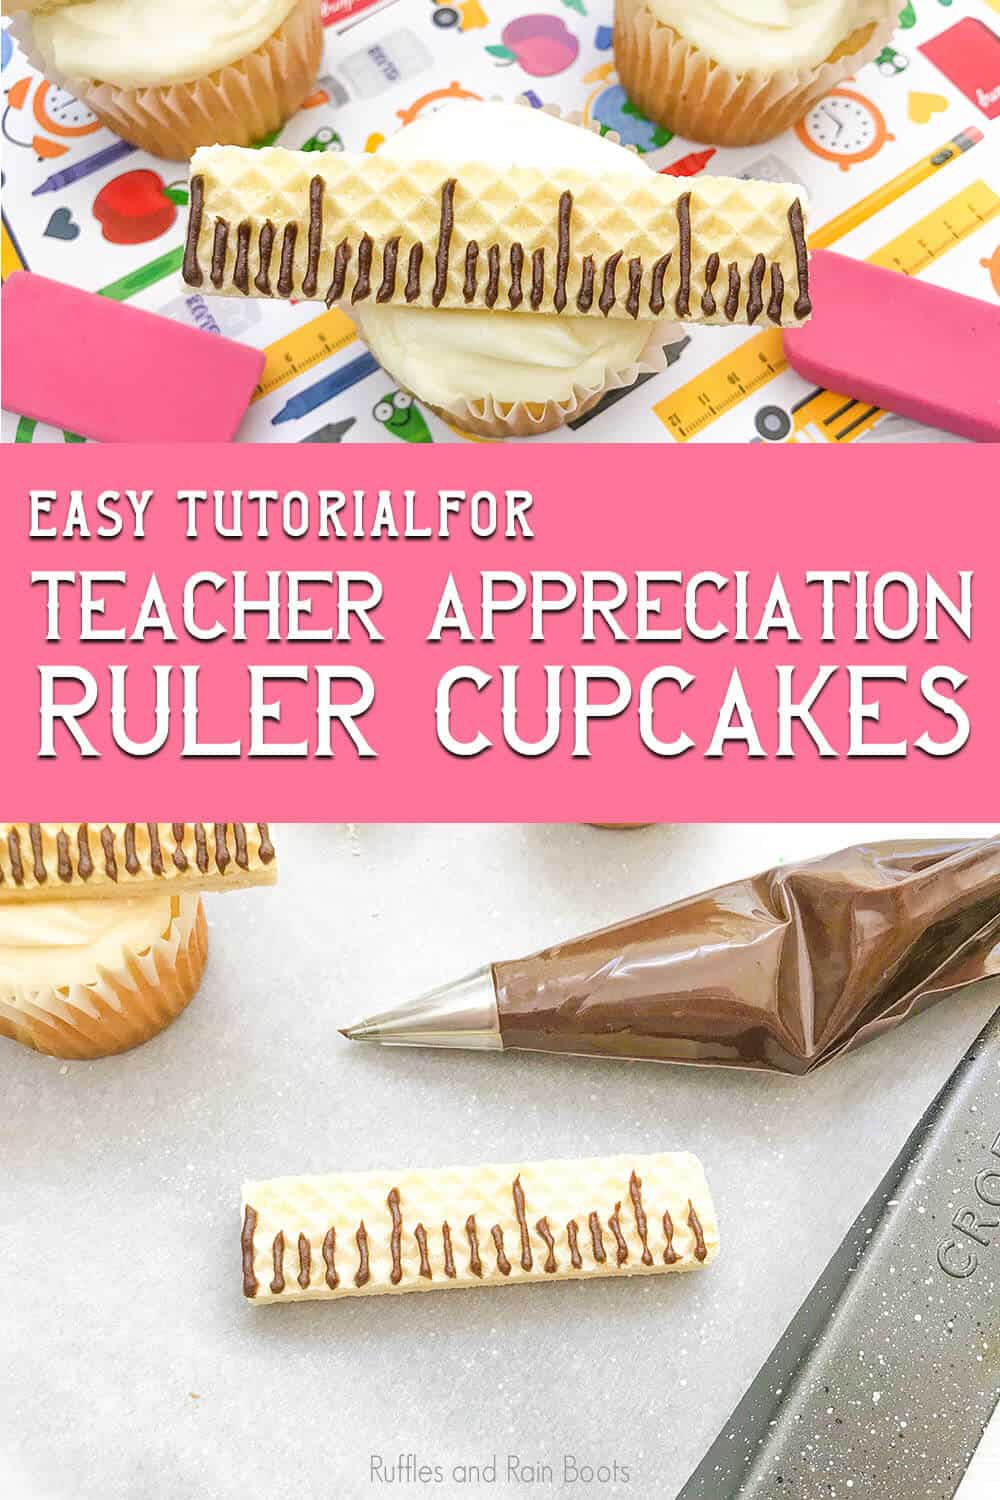 photo collage of ruler cupcakes with text which reads easy tutorial for teacher appreciation ruler cupcakes